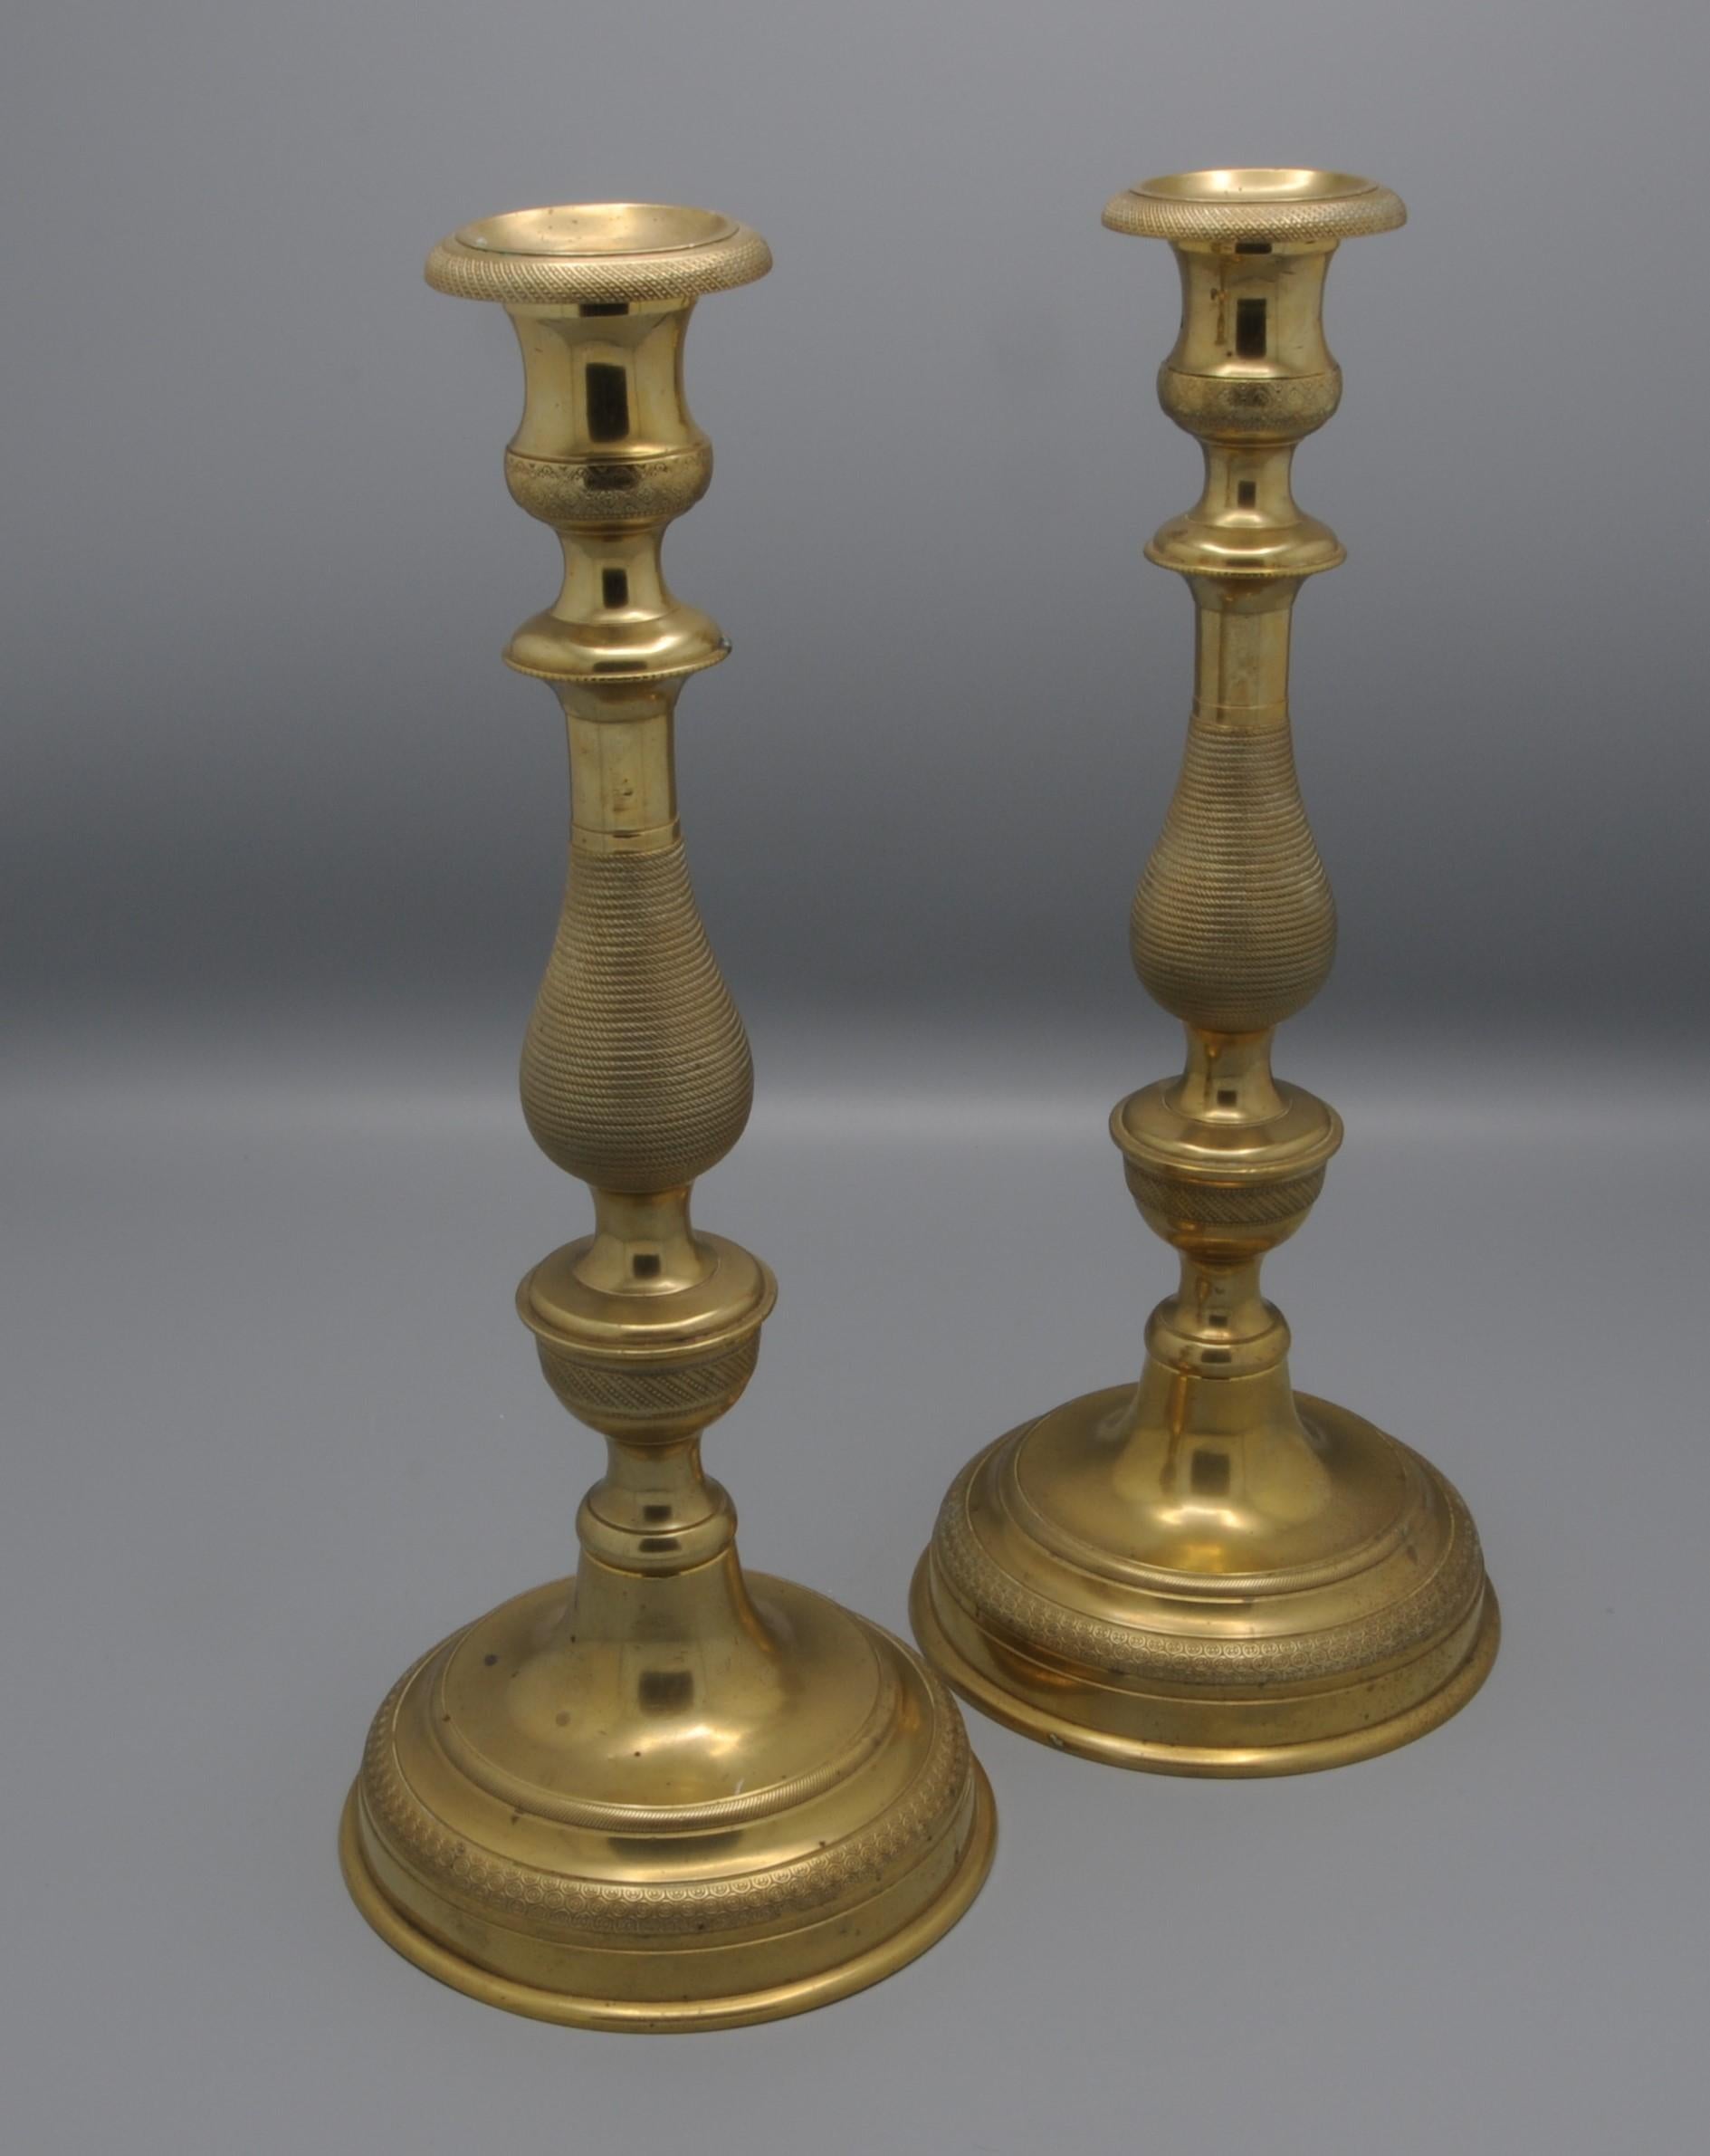 French Directoire Period brass Candlesticks. 
The detachable socles set within urn shaped holders, baluster-shaped stems, terminating on circular bases.
Some rubbing and wear.